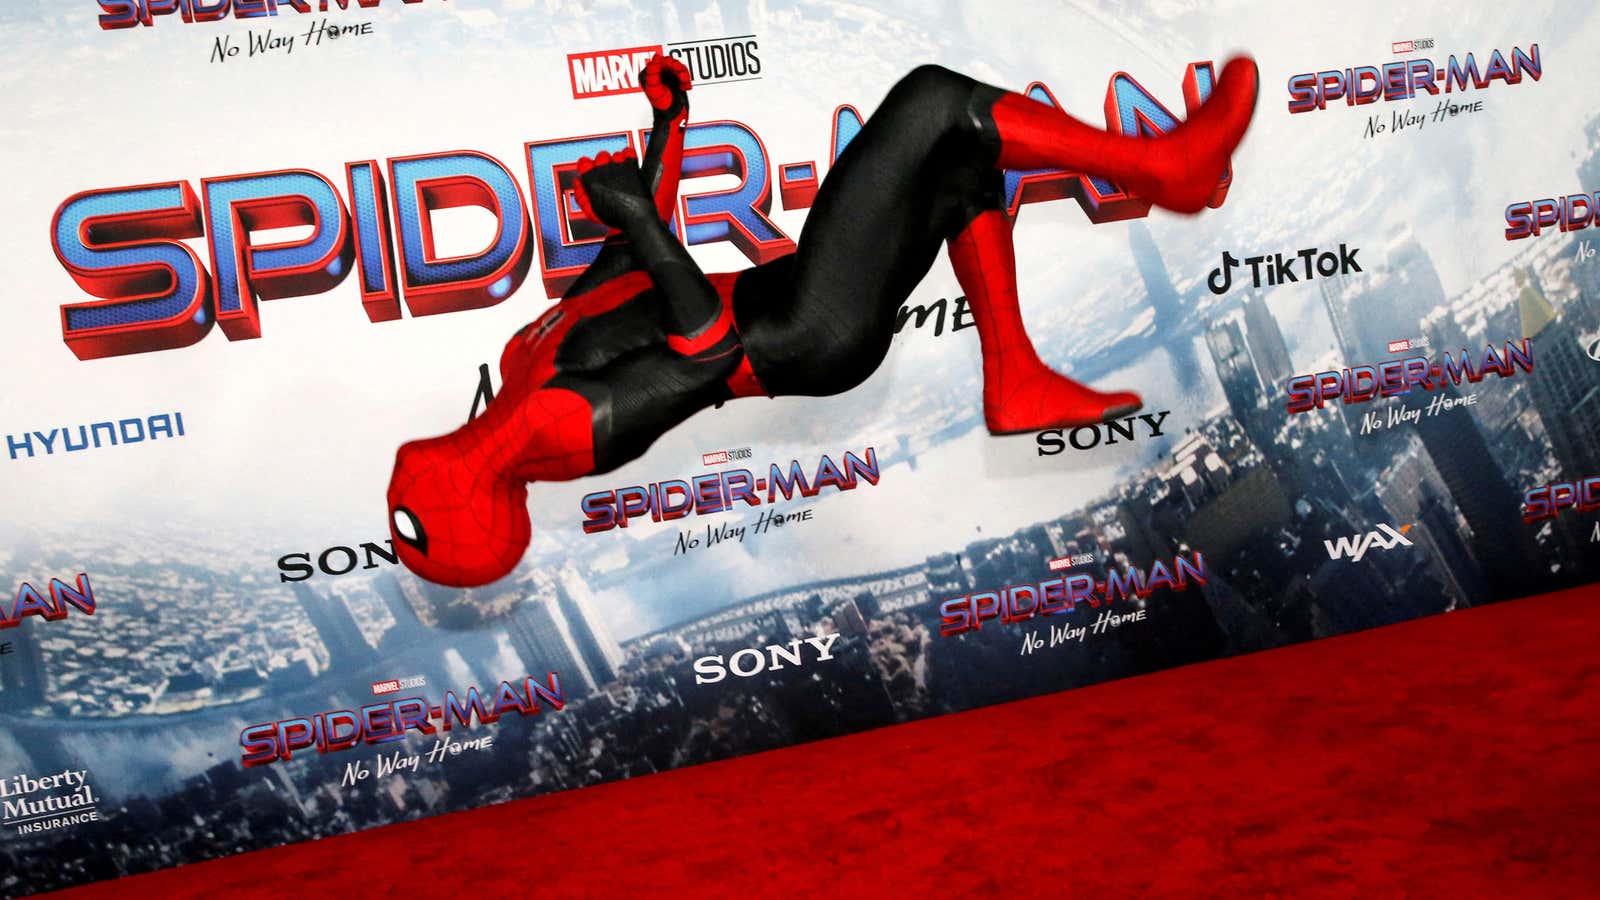 Spider-Man: No Way Home' China Release Date in Doubt – The